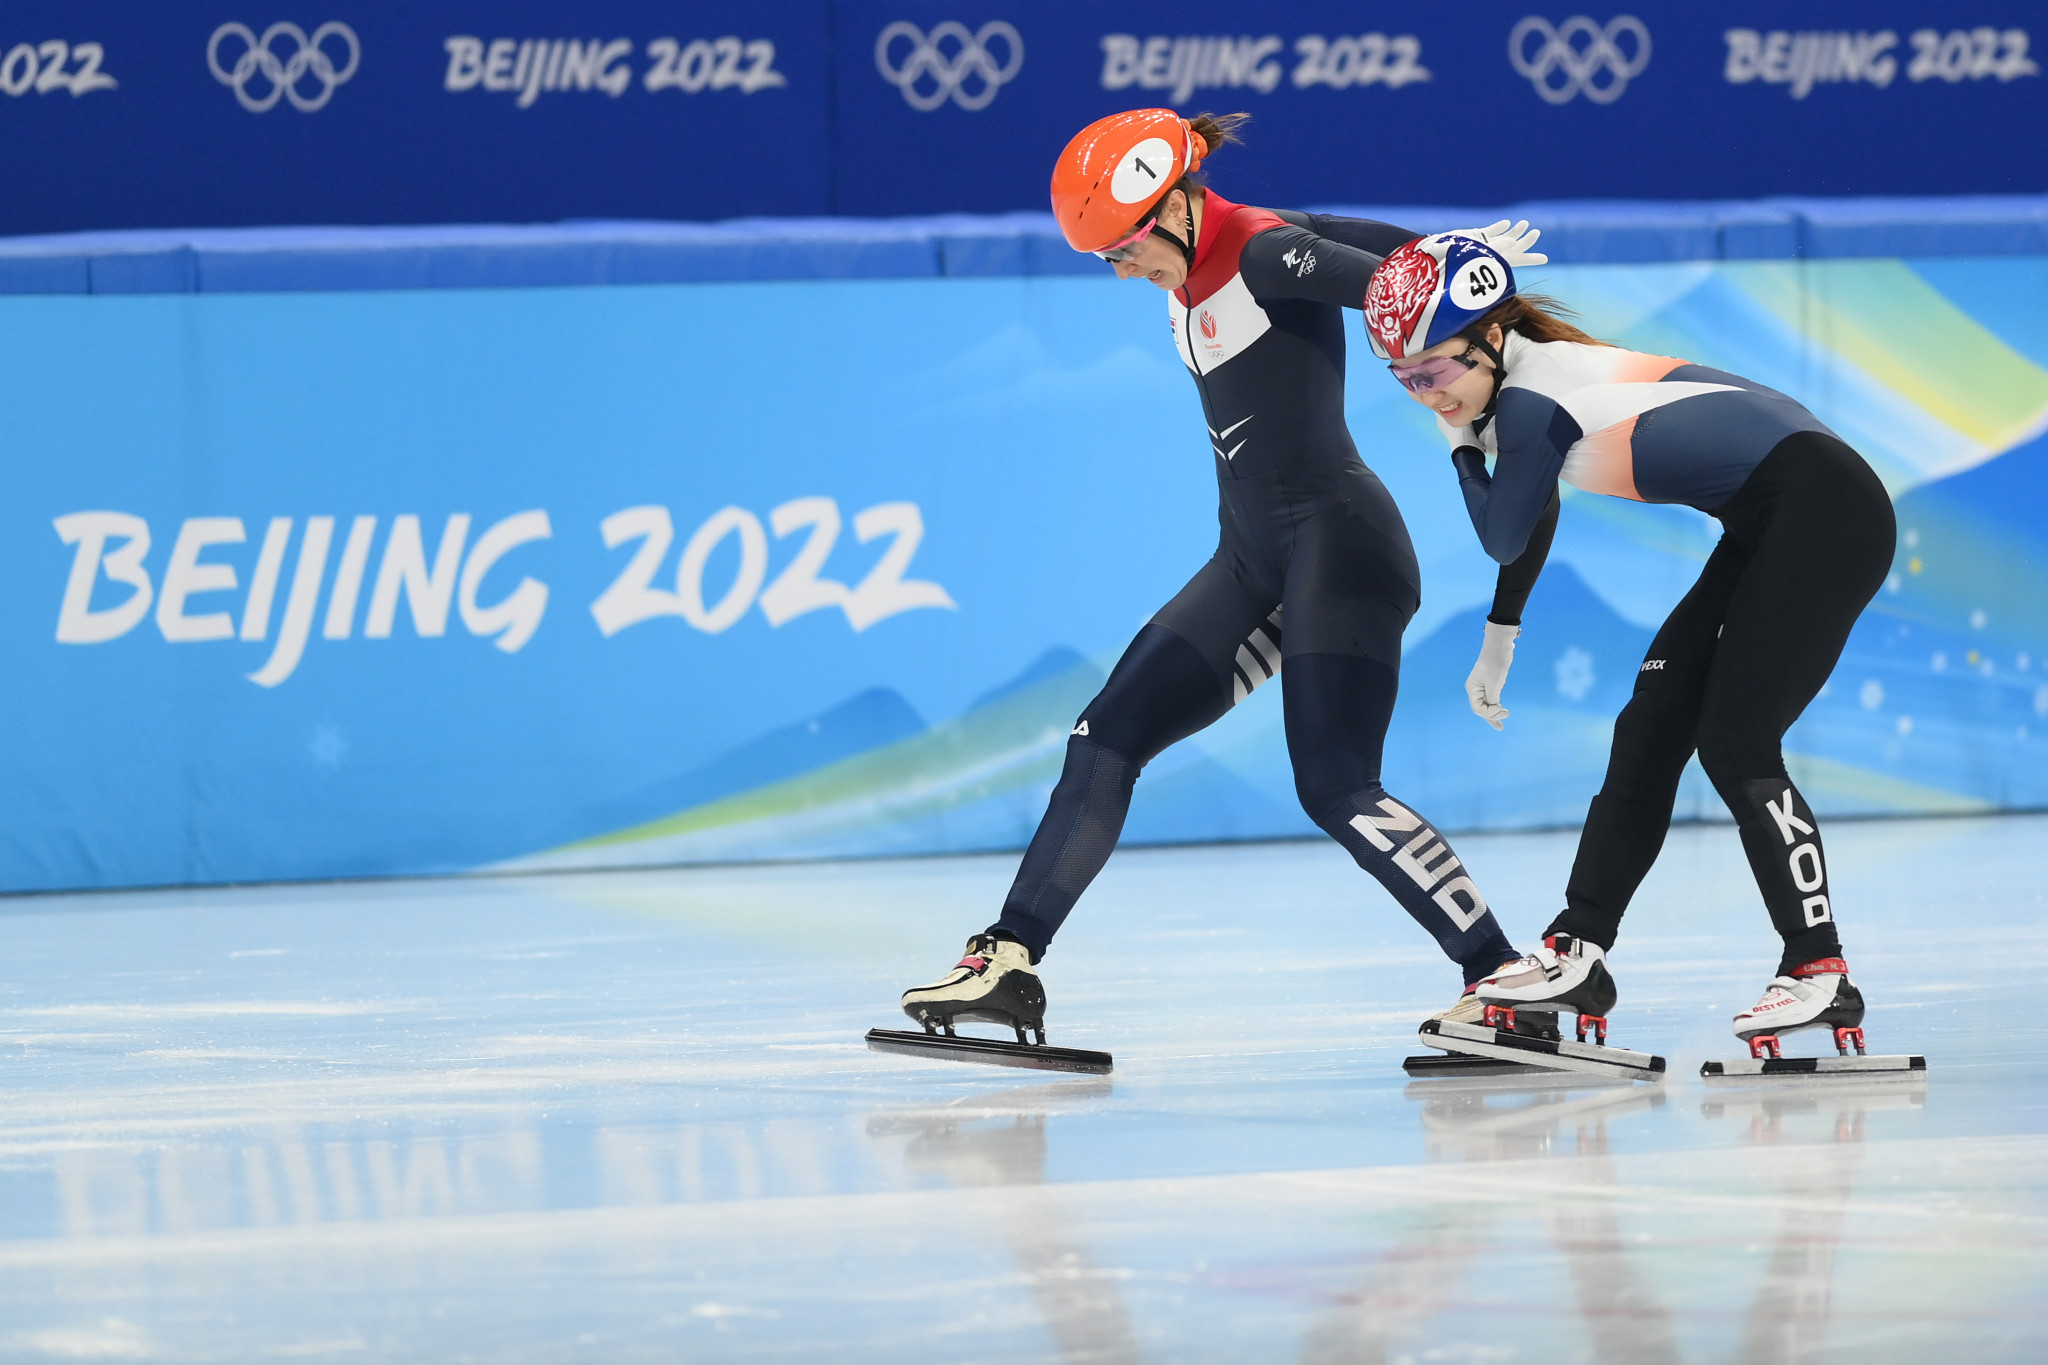 Suzanne Schulting pipped Choi Min-jeong to the line in the women's 1,000m final ©Getty Images